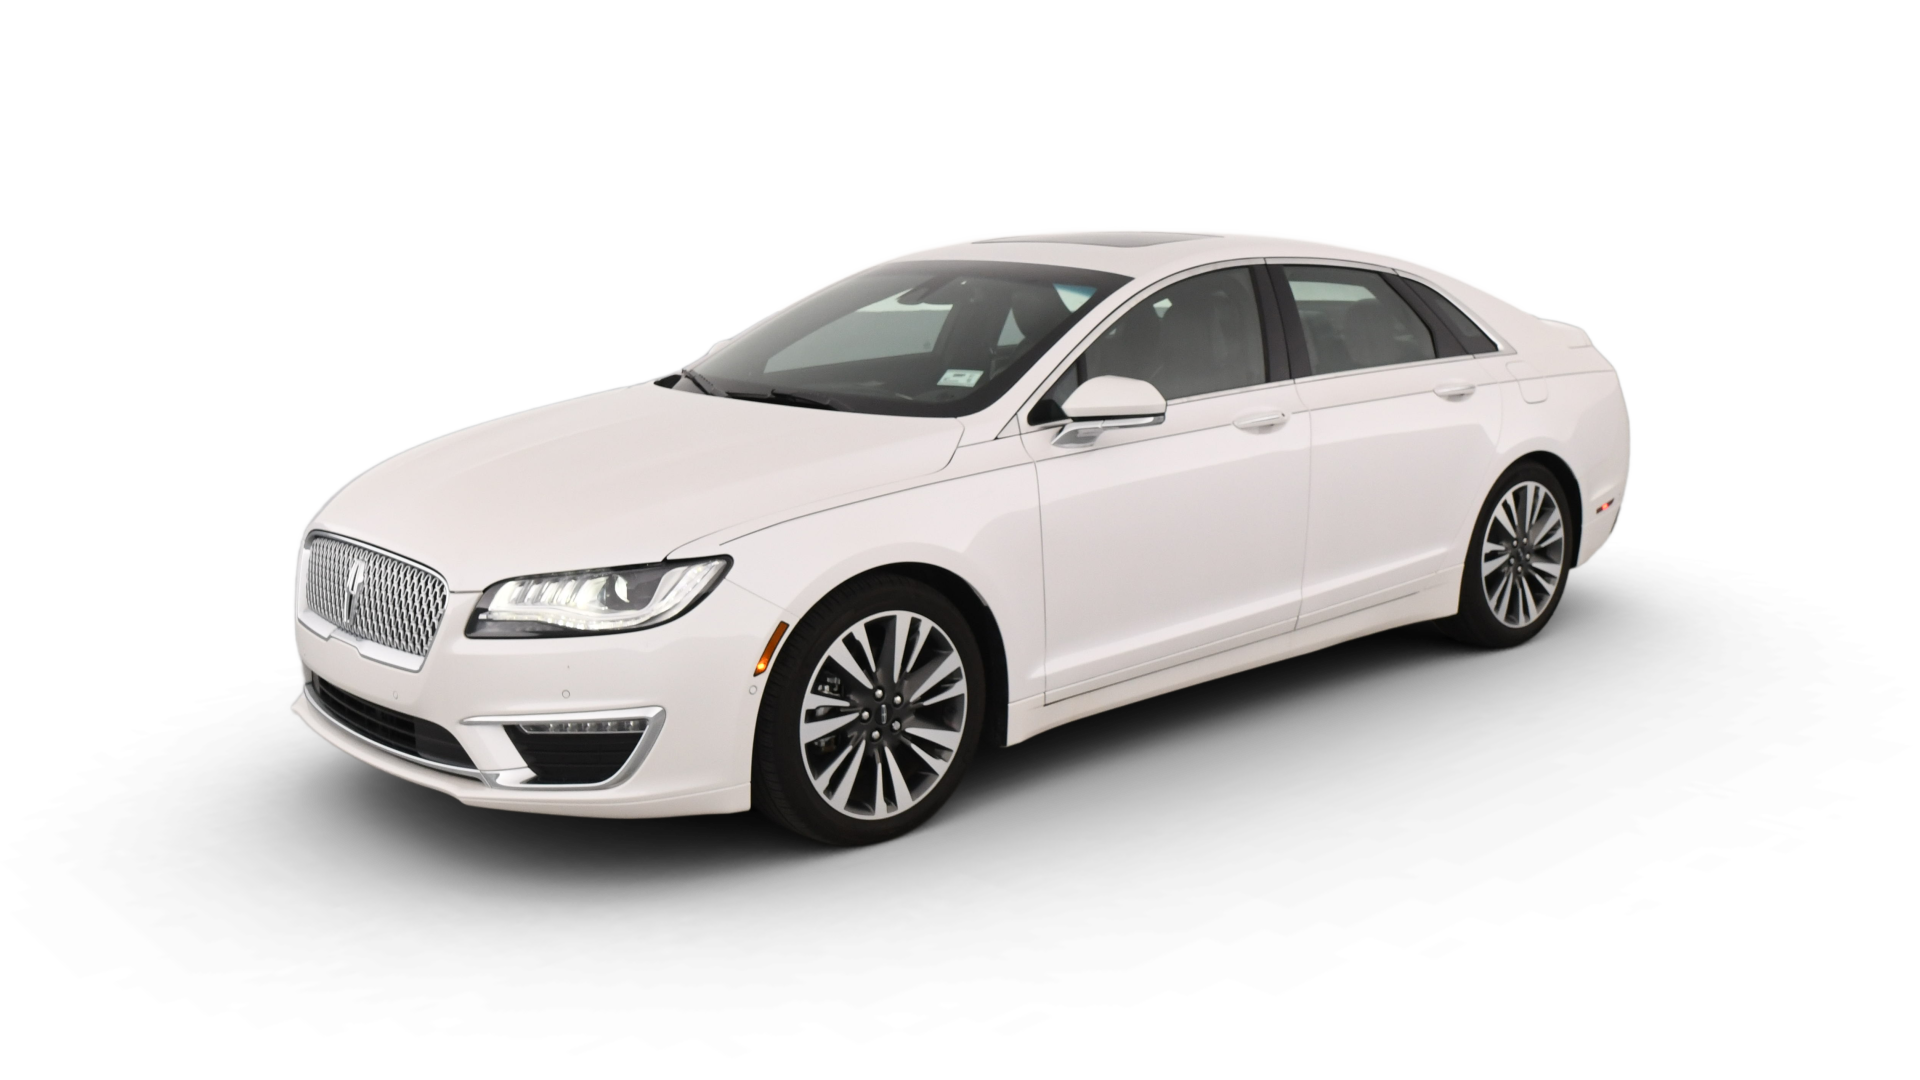 Used 2020 Lincoln MKZ For Sale Online | Carvana